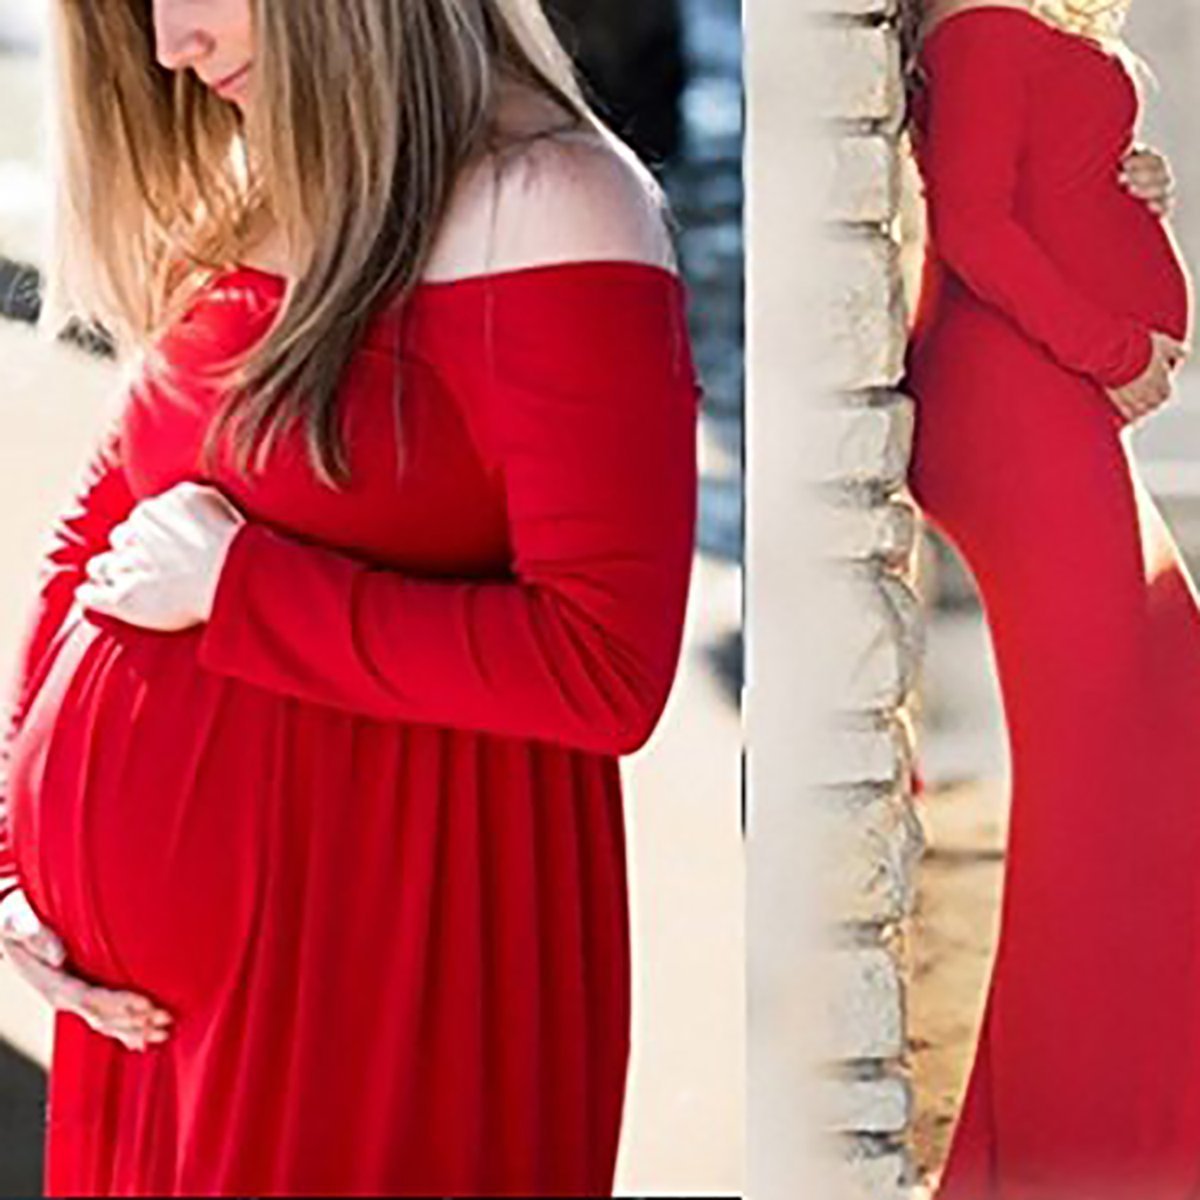 Maternity Photography Props Long Sleeve Pregnancy Maxi Dresses